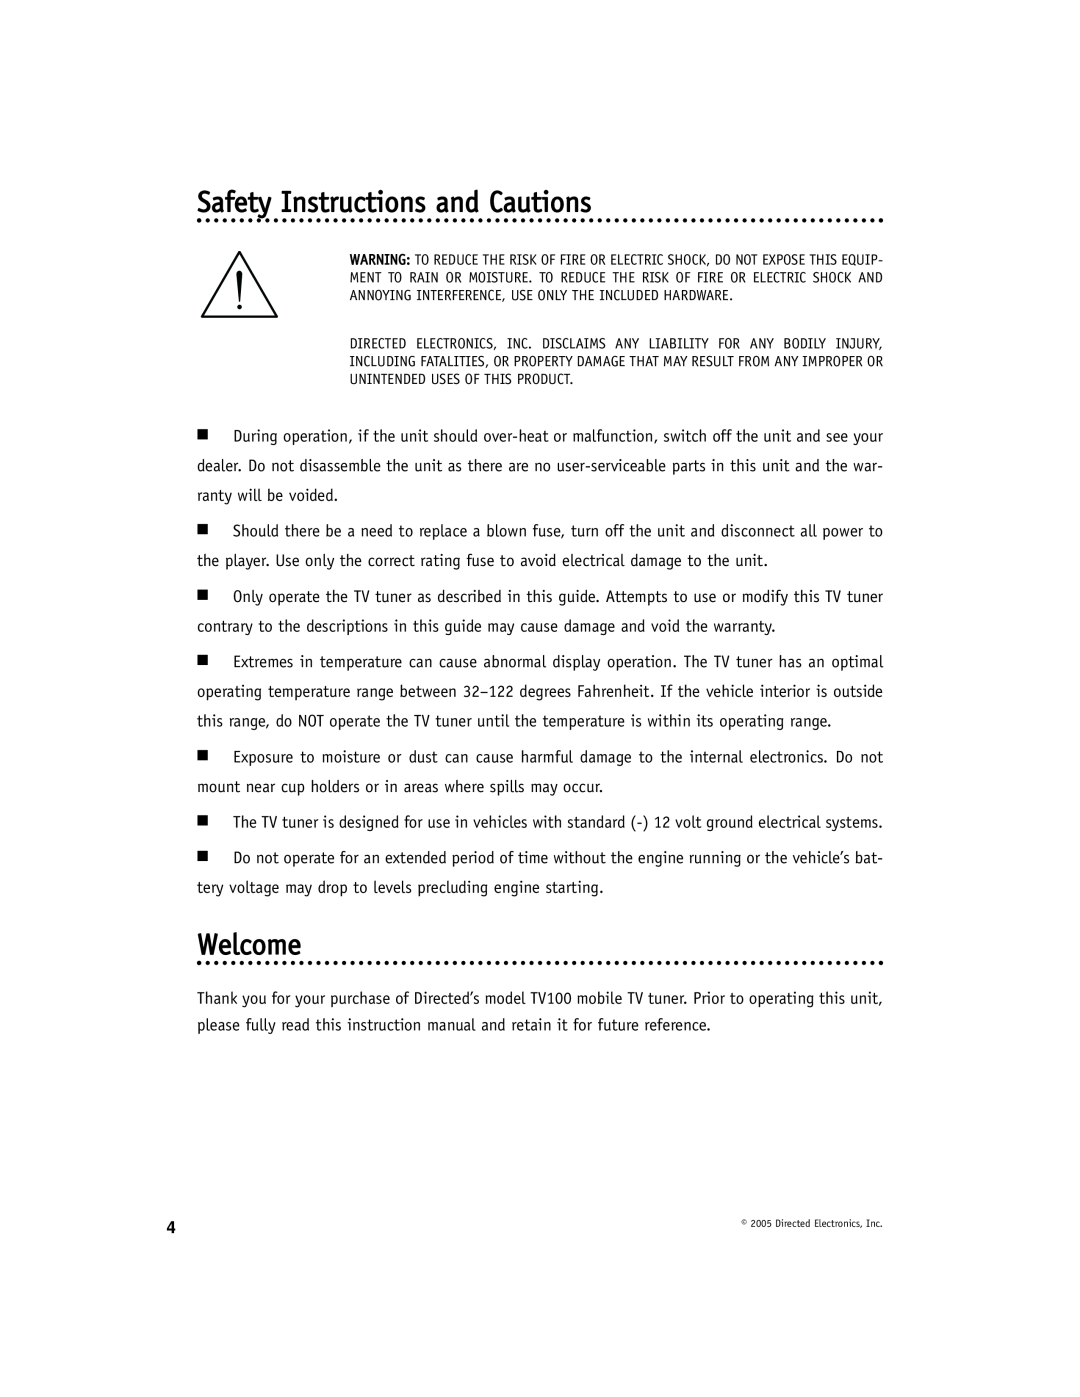 Directed Video TV100 manual Safety Instructions and Cautions, Welcome 